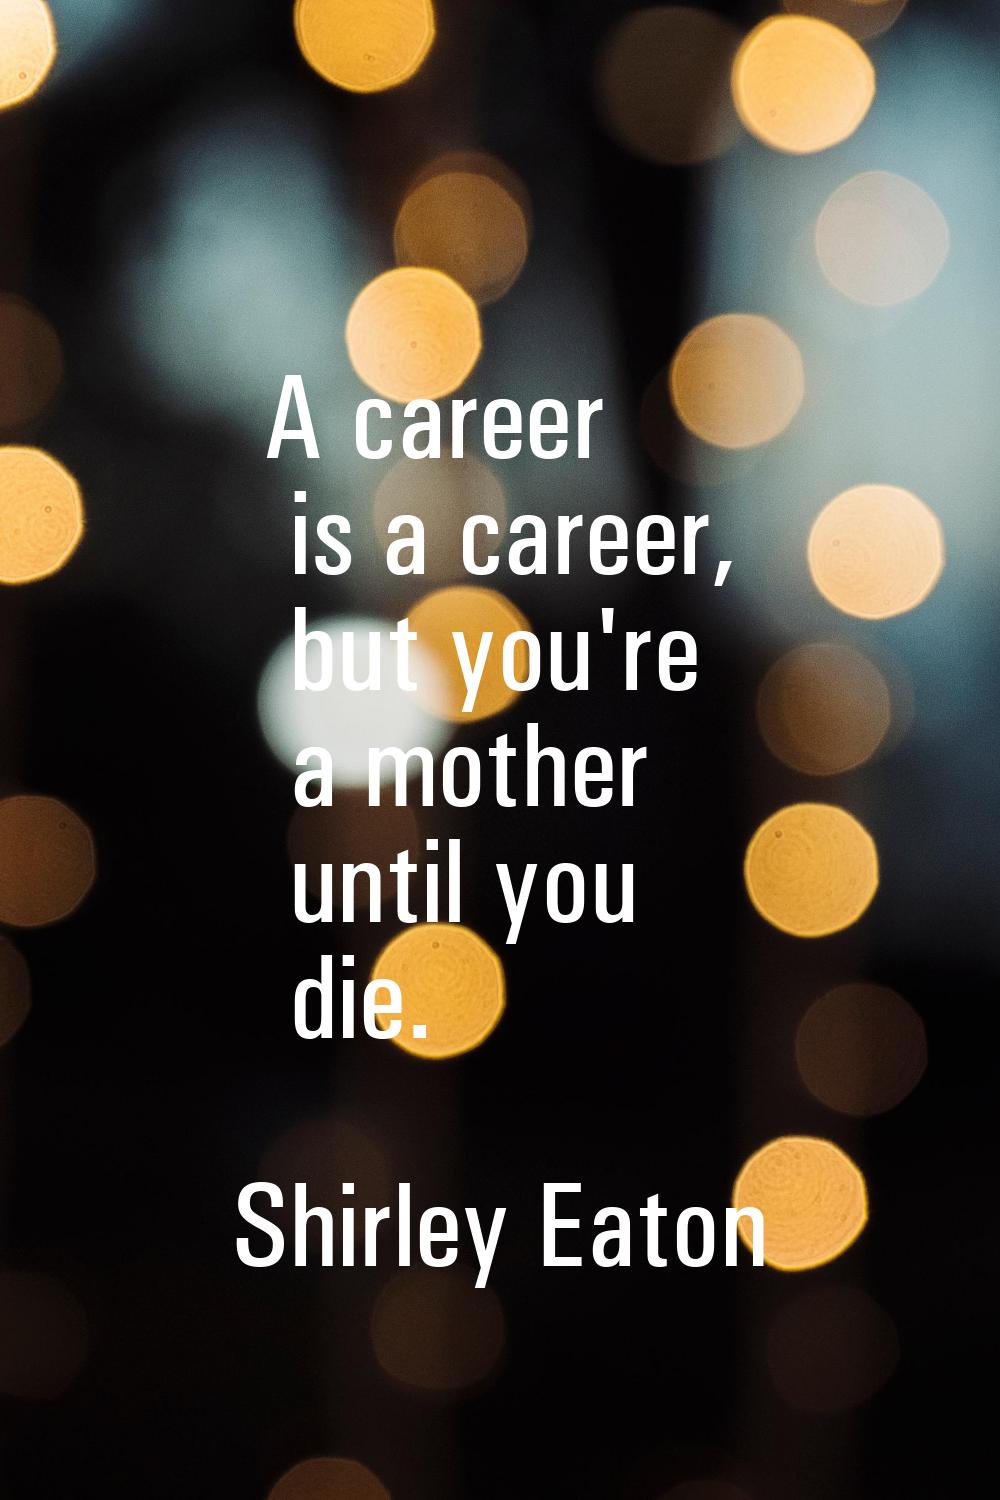 A career is a career, but you're a mother until you die.